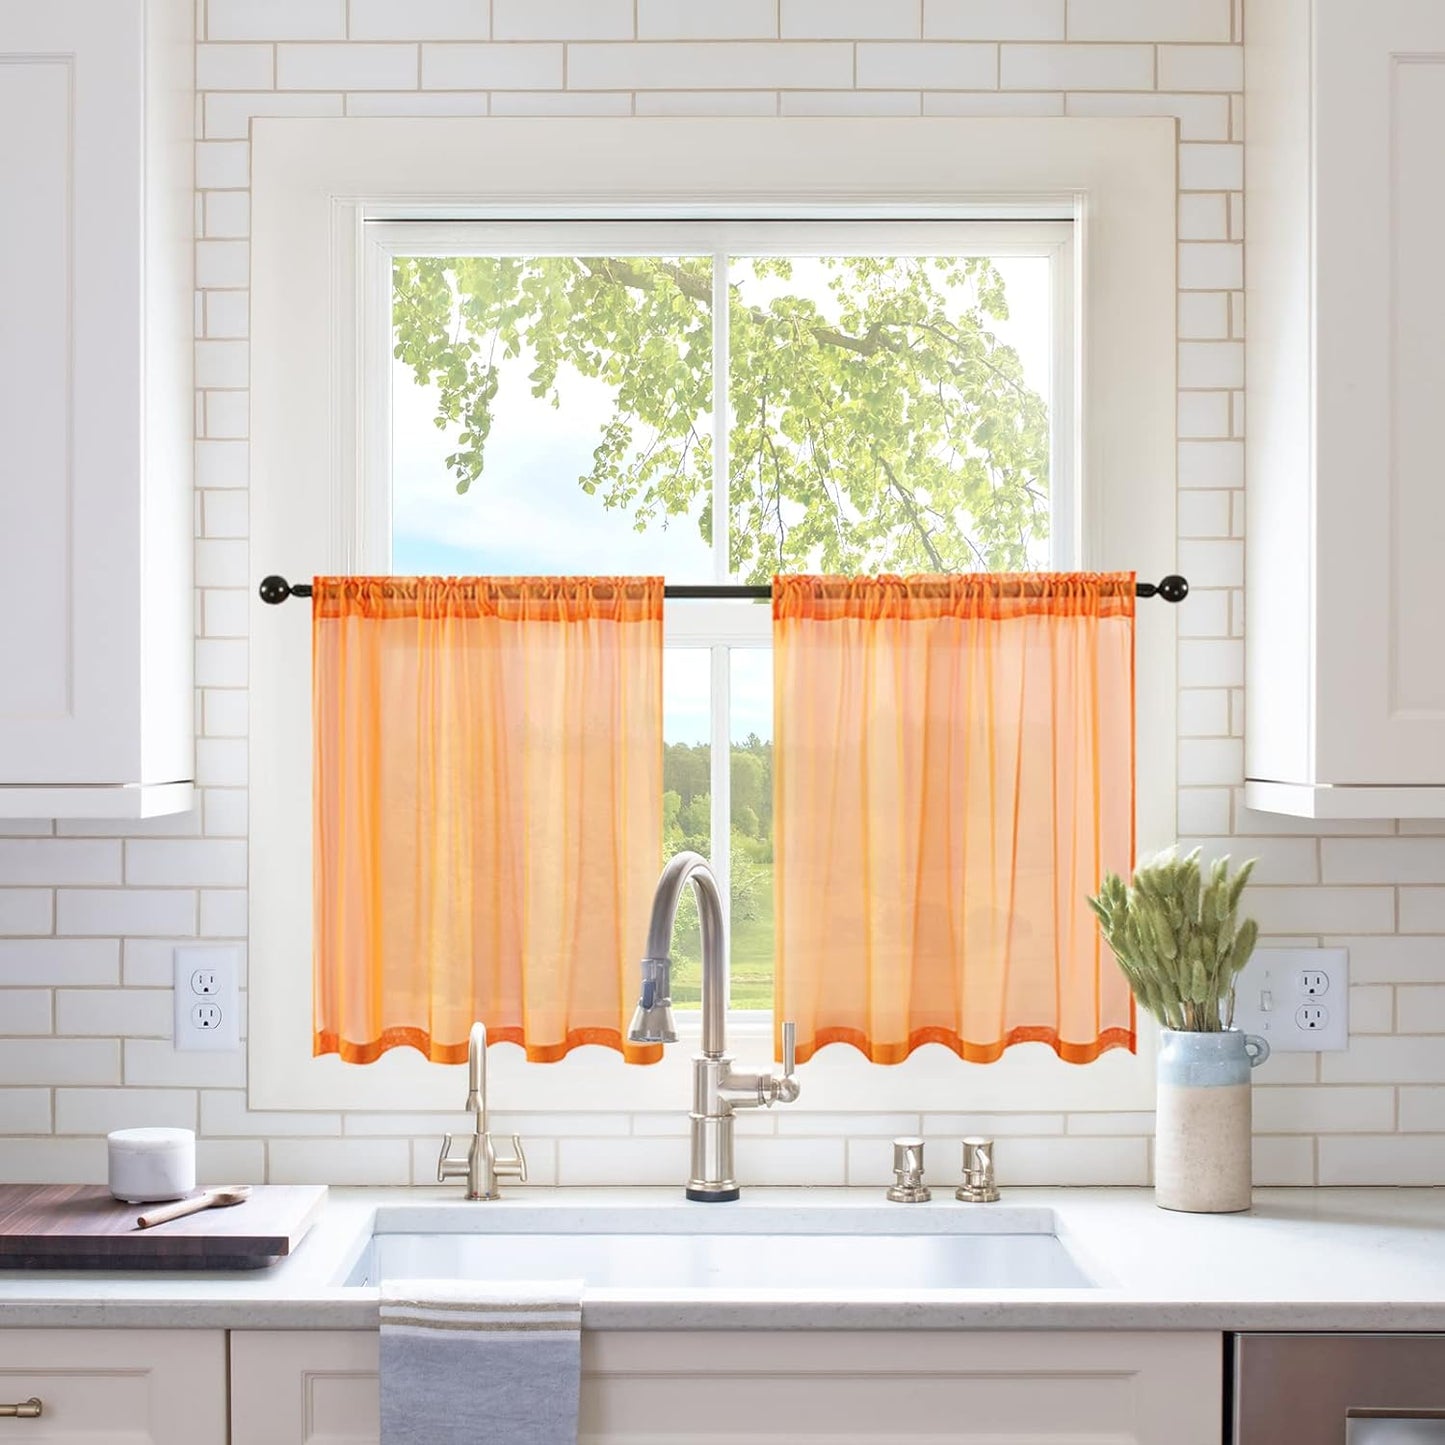 MIULEE White Sheer Curtains 96 Inches Long Window Curtains 2 Panels Solid Color Elegant Window Voile Panels/Drapes/Treatment for Bedroom Living Room (54 X 96 Inches White)  MIULEE Orange 29''W X 24''L 